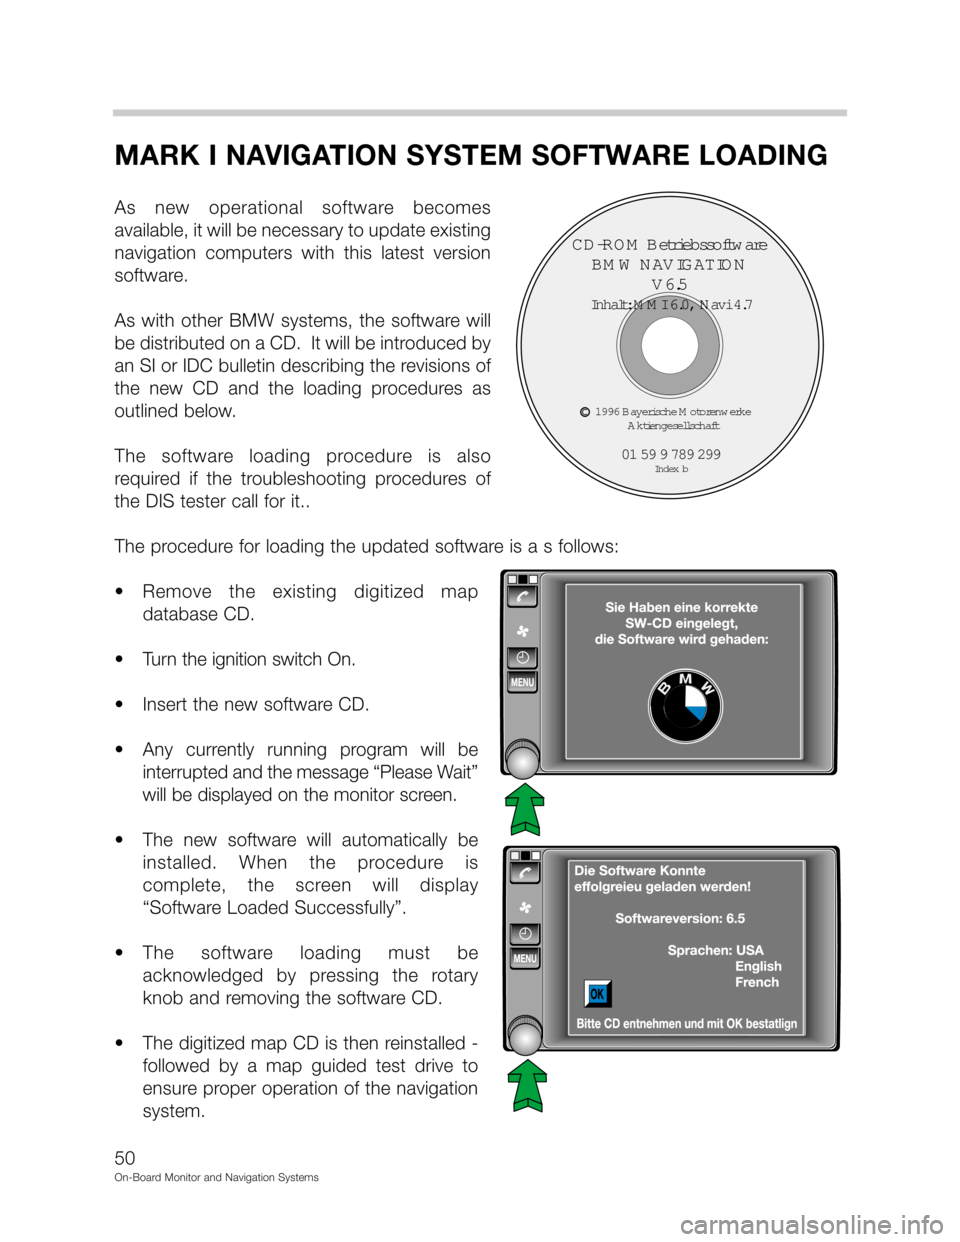 BMW 5 SERIES 1998 E39 On Board Monitor System Service Manual 	>
4
8

	5@3
8
 
% 

 % 	
&6%




&
 	
 %   &
%
 